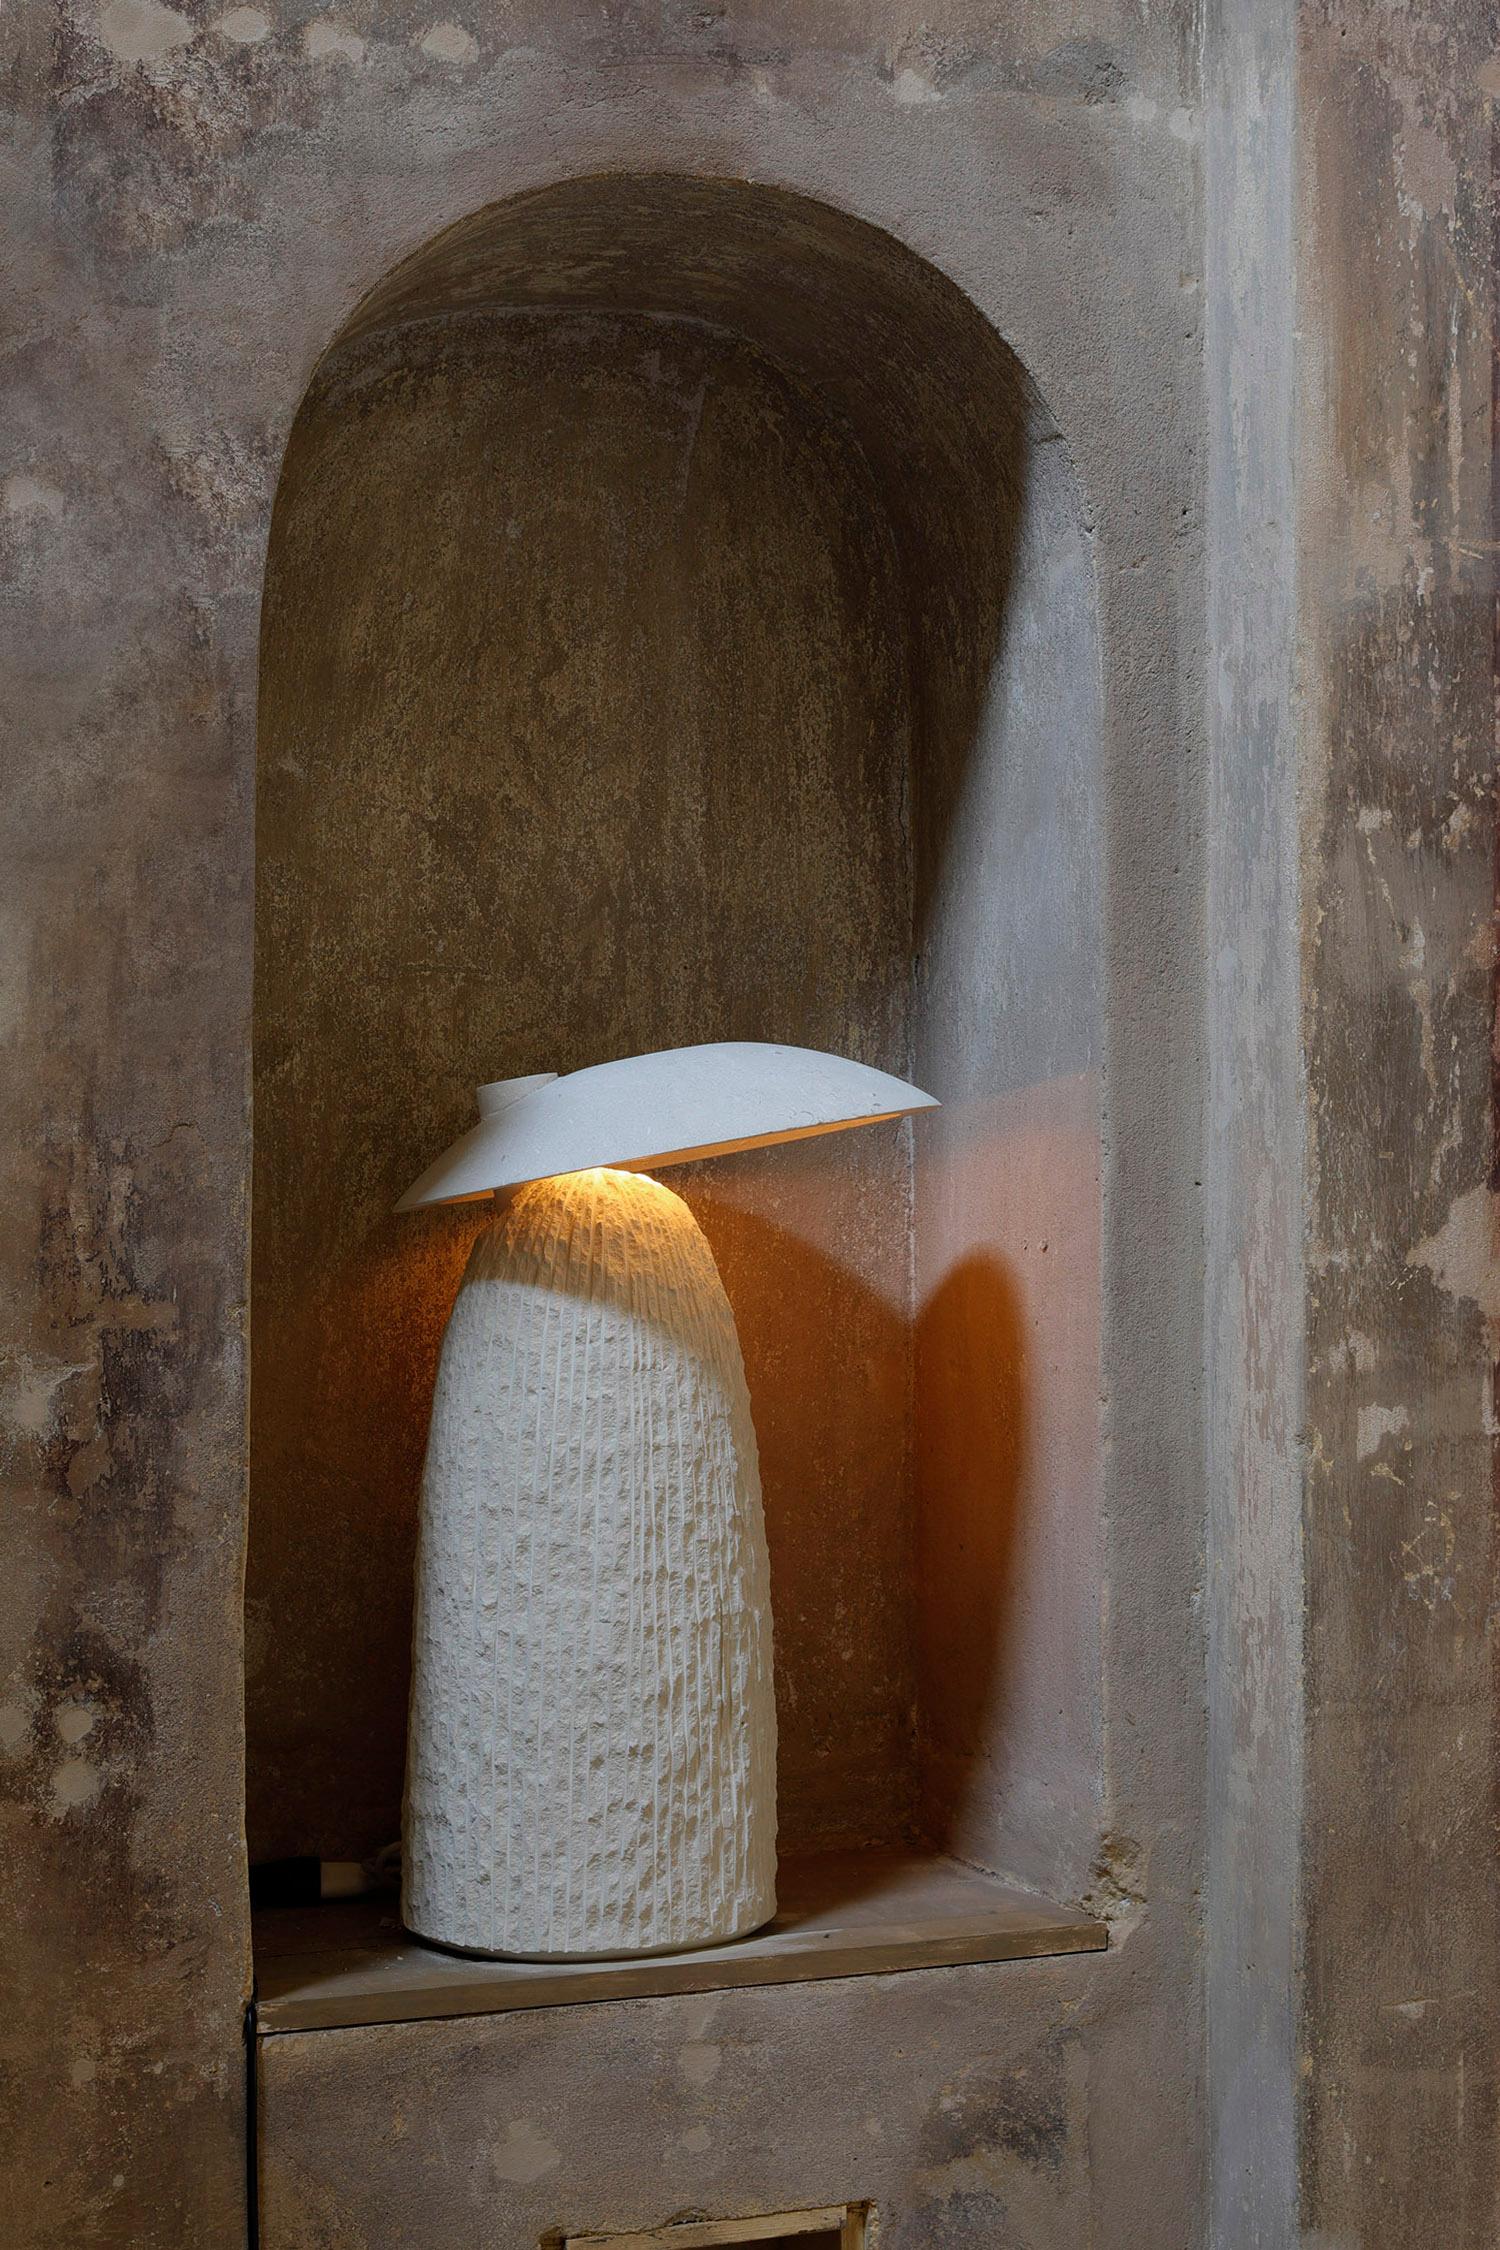 Doma table lamp by Frederic Saulou
Handmade
Materials: Limestone, led.
Dimensions: D 35 x W 35 x H 65 cm

Frederic Saulou's sculpted design artworks introduce a series of works coming from researches and partnerships between local ateliers and